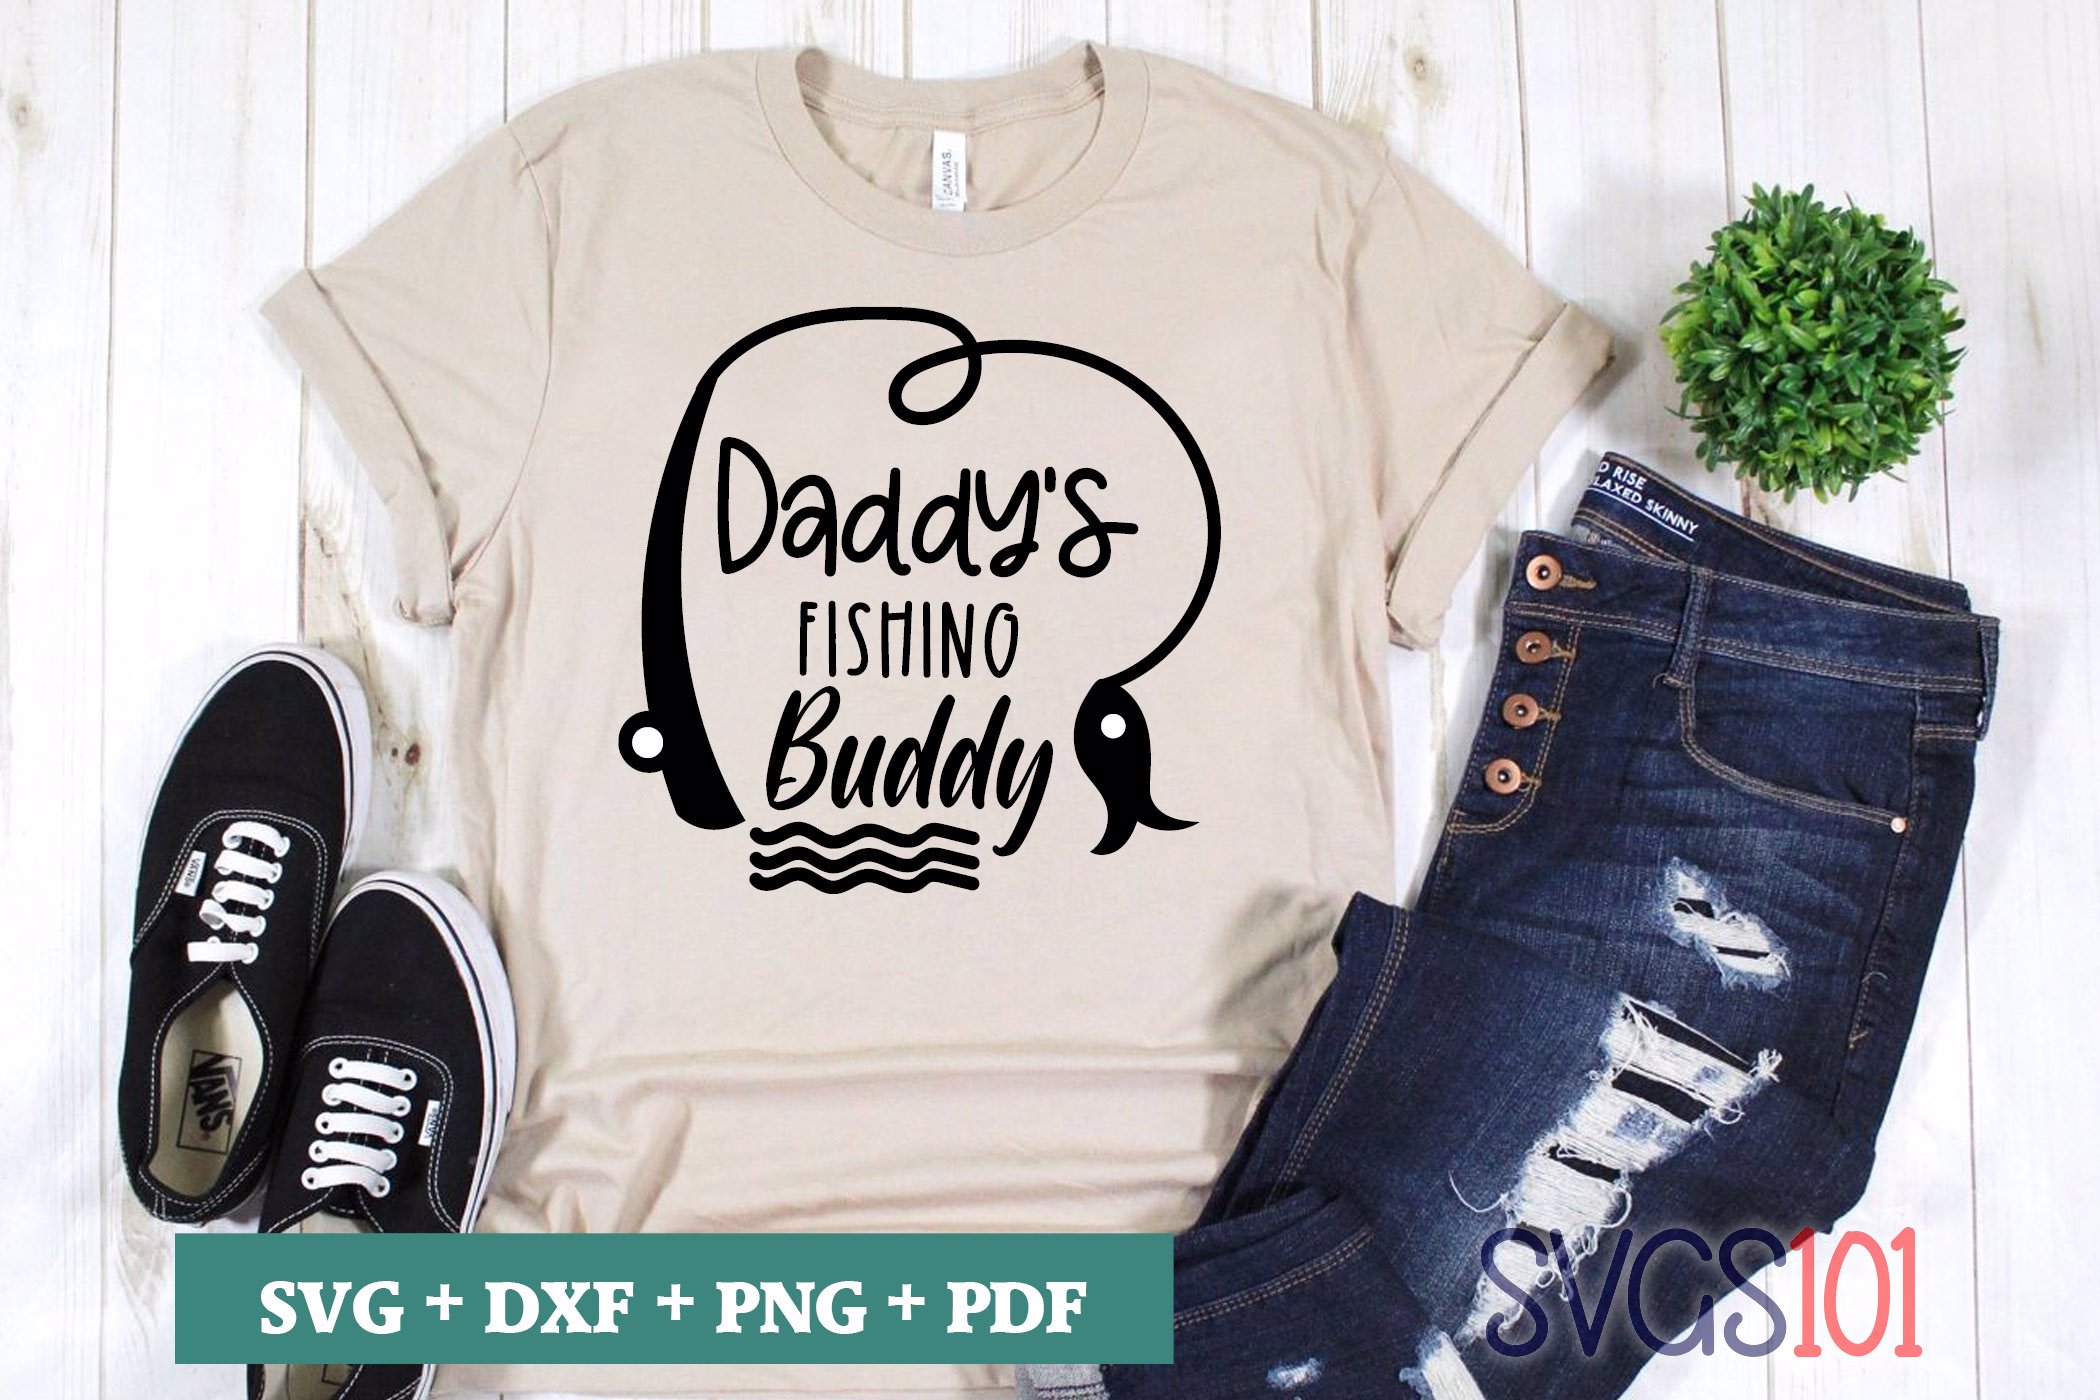 Download Daddy S Fishing Buddy Svg Cuttable File Dxf Eps Png Pdf Svg Cutting File